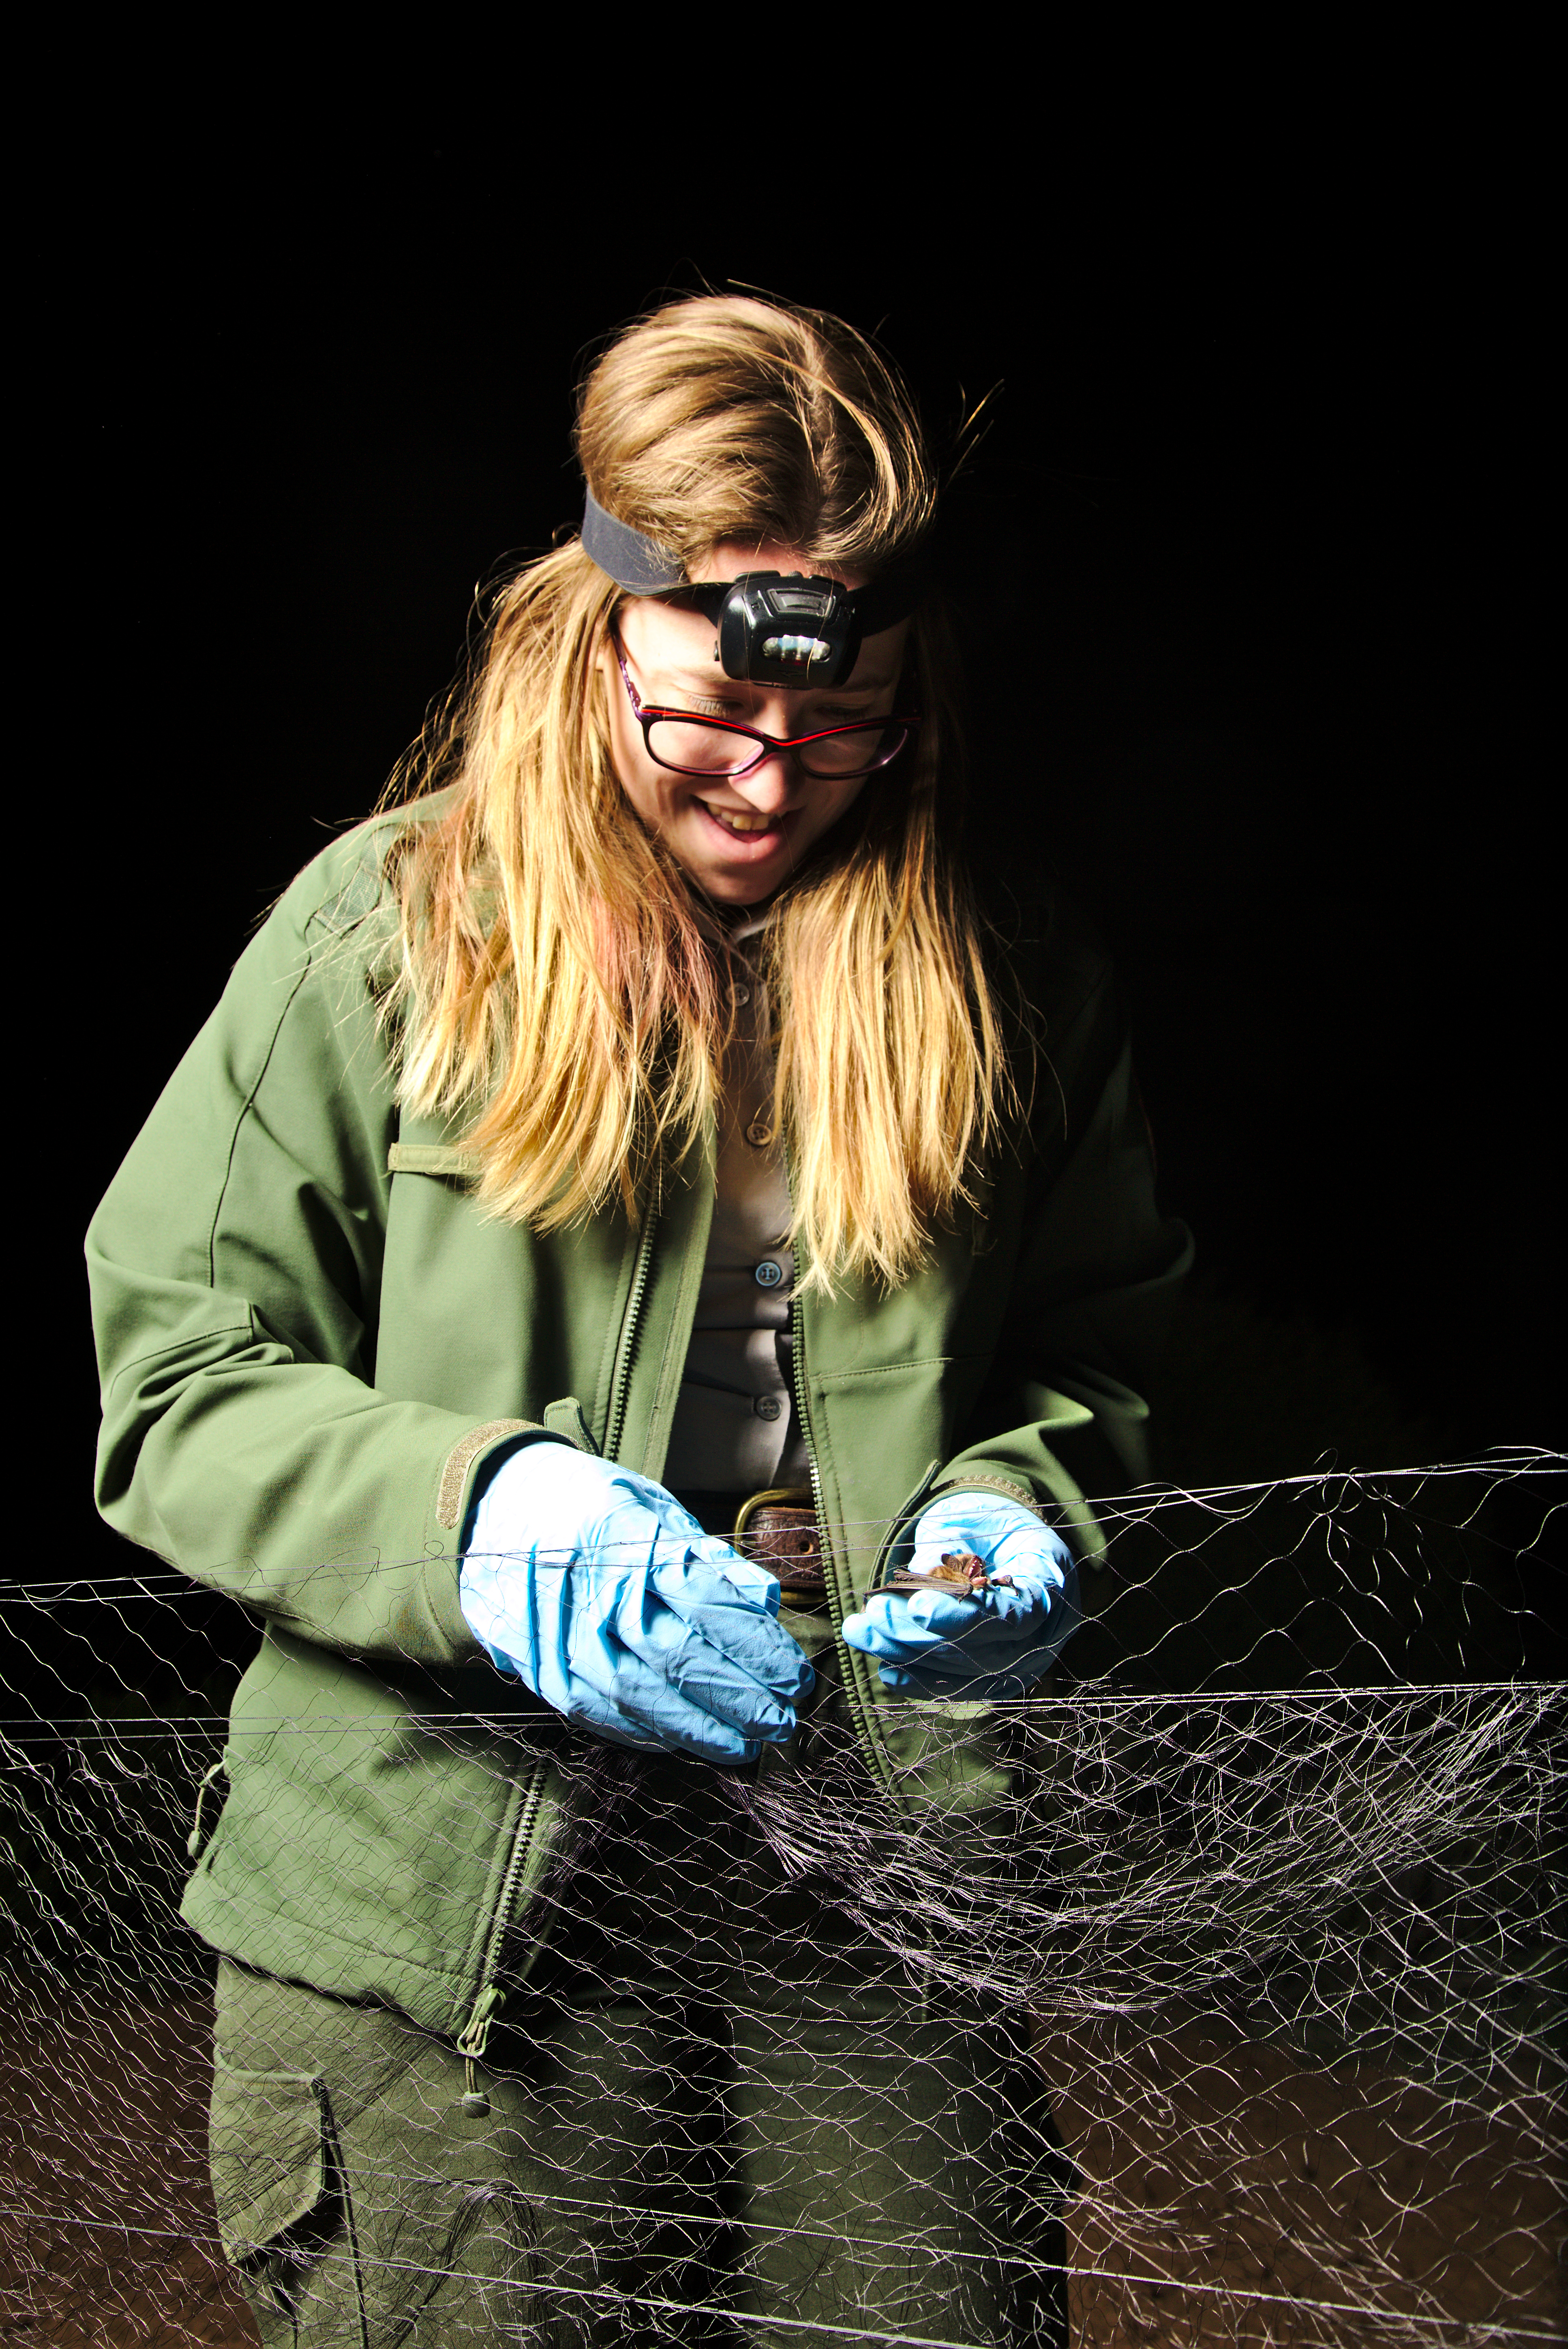 Laura removing a Myotis sp. from the mist net